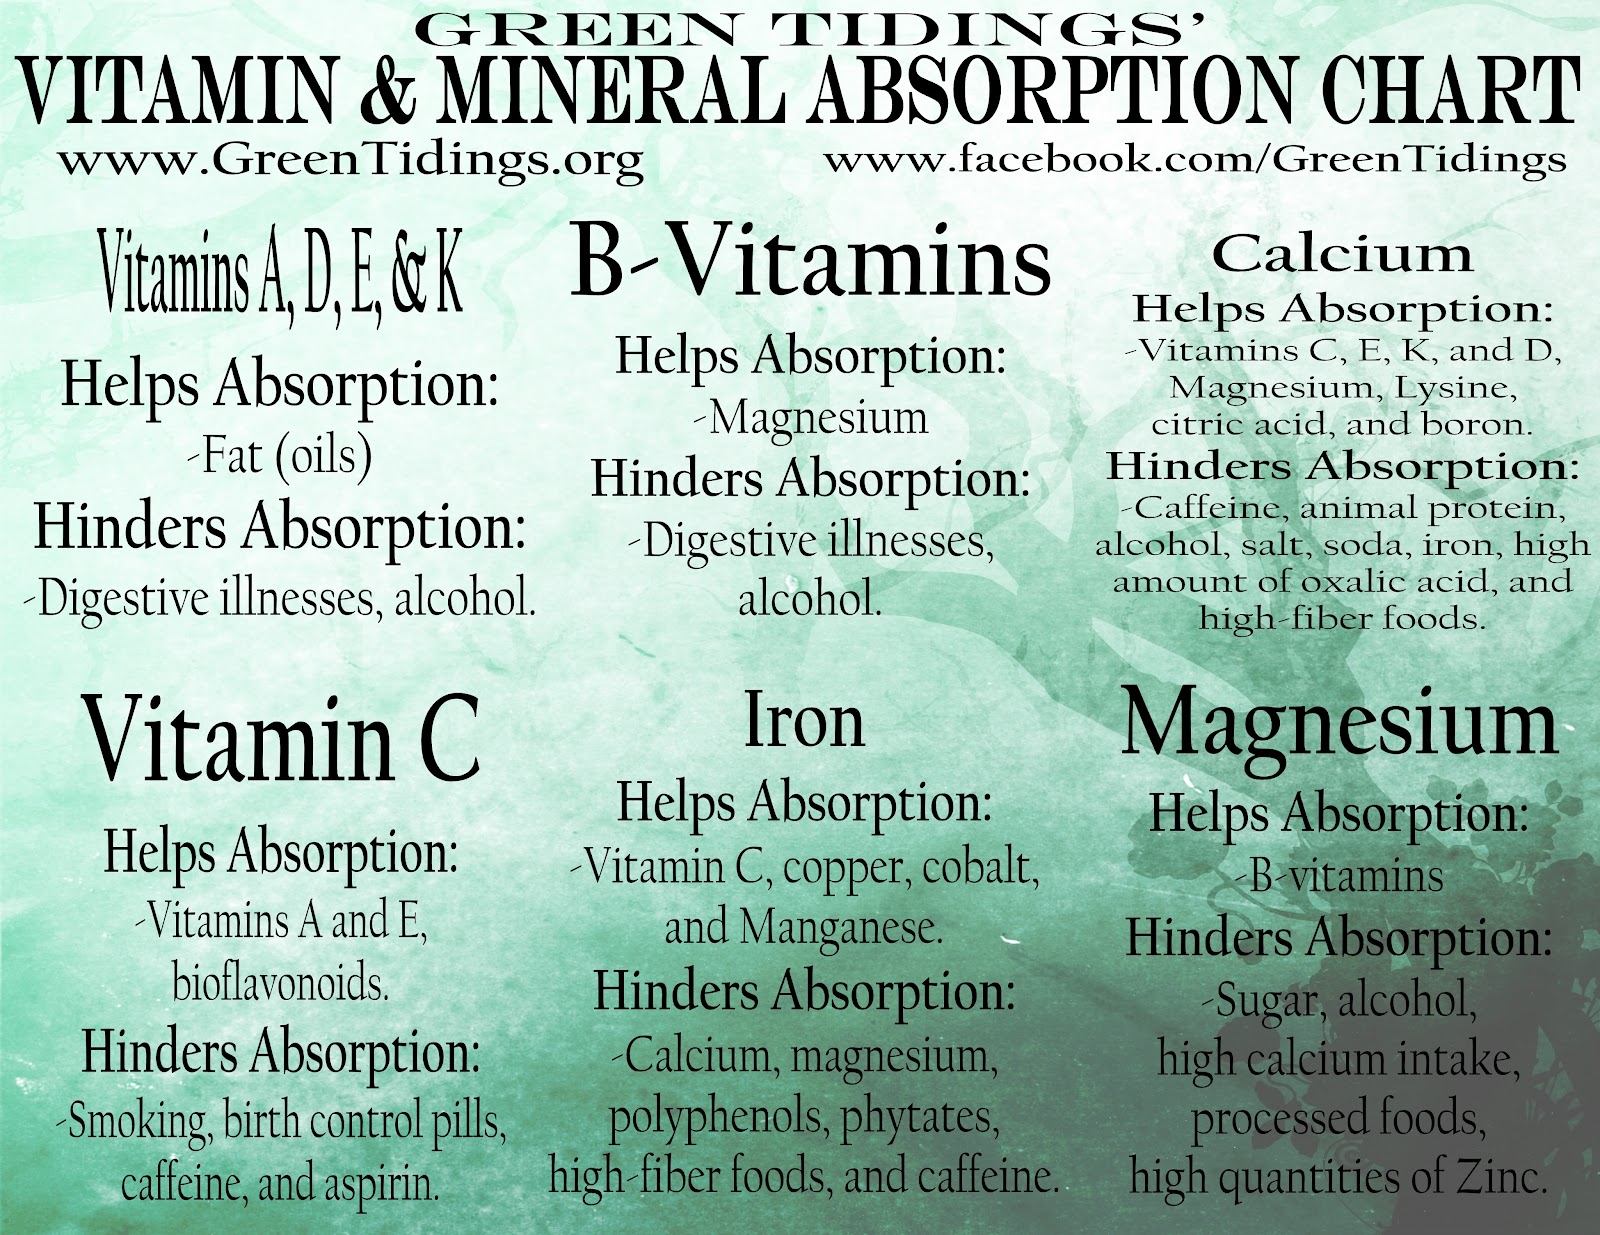 Green Tidings: Vitamin and Mineral Absorption Chart